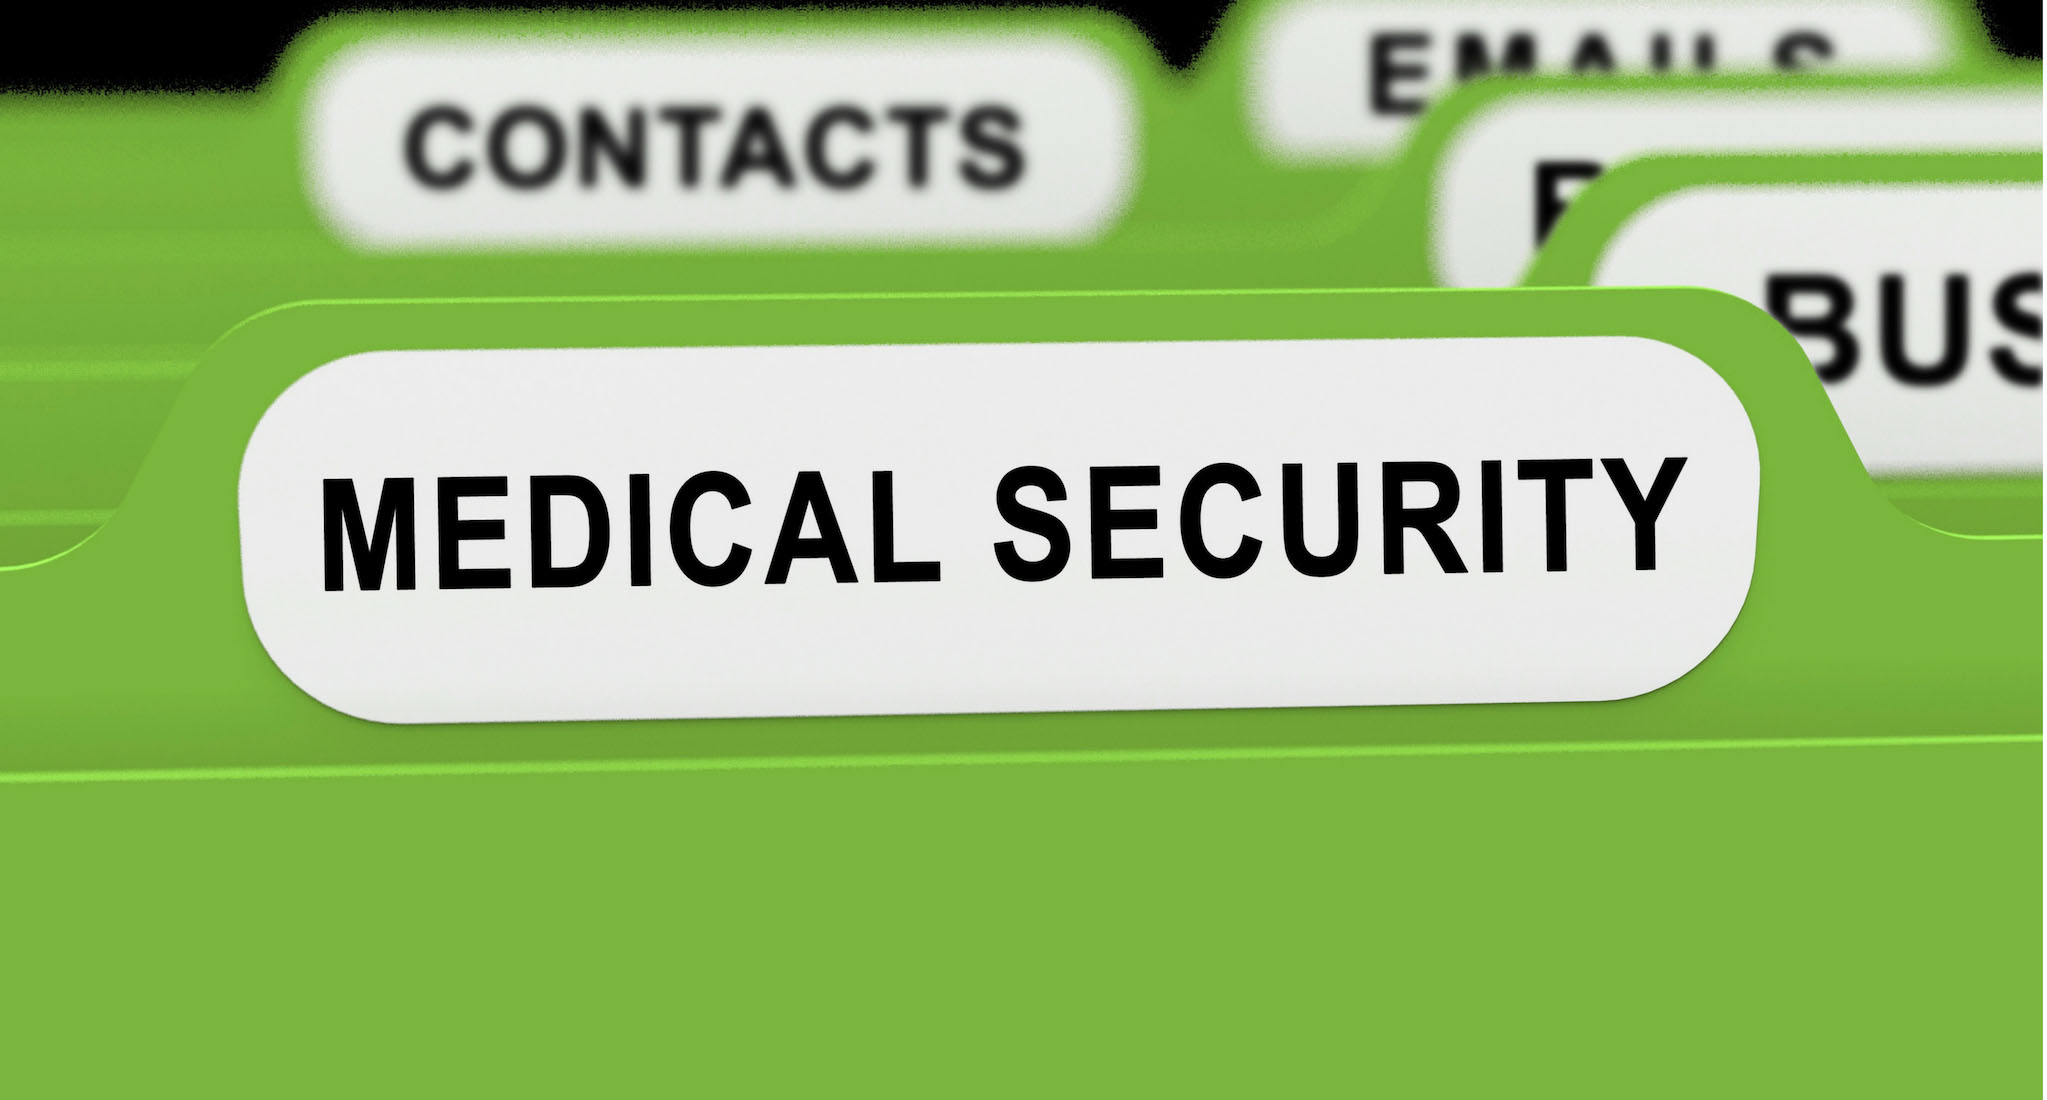 A file label that says "MEDICAL SECURITY"